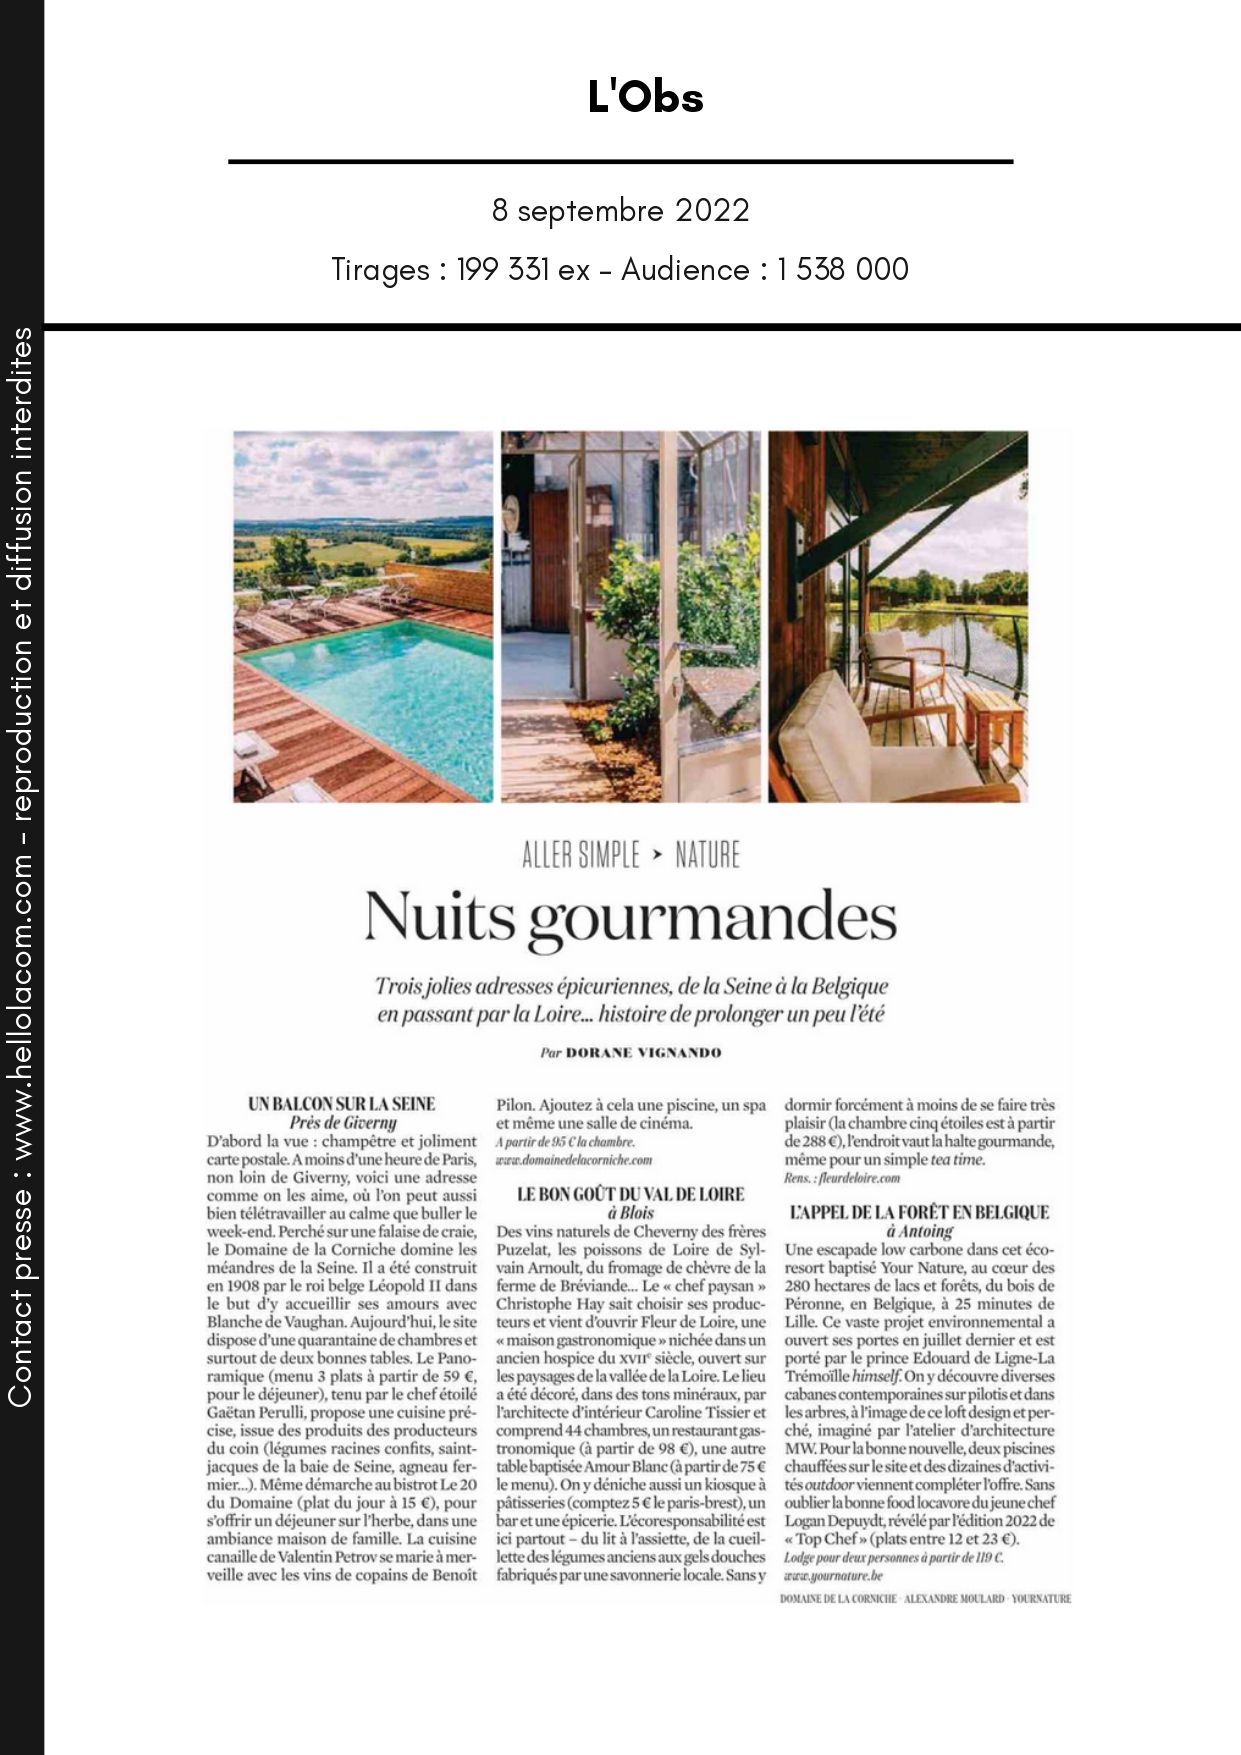 Article Nuits gourmandes